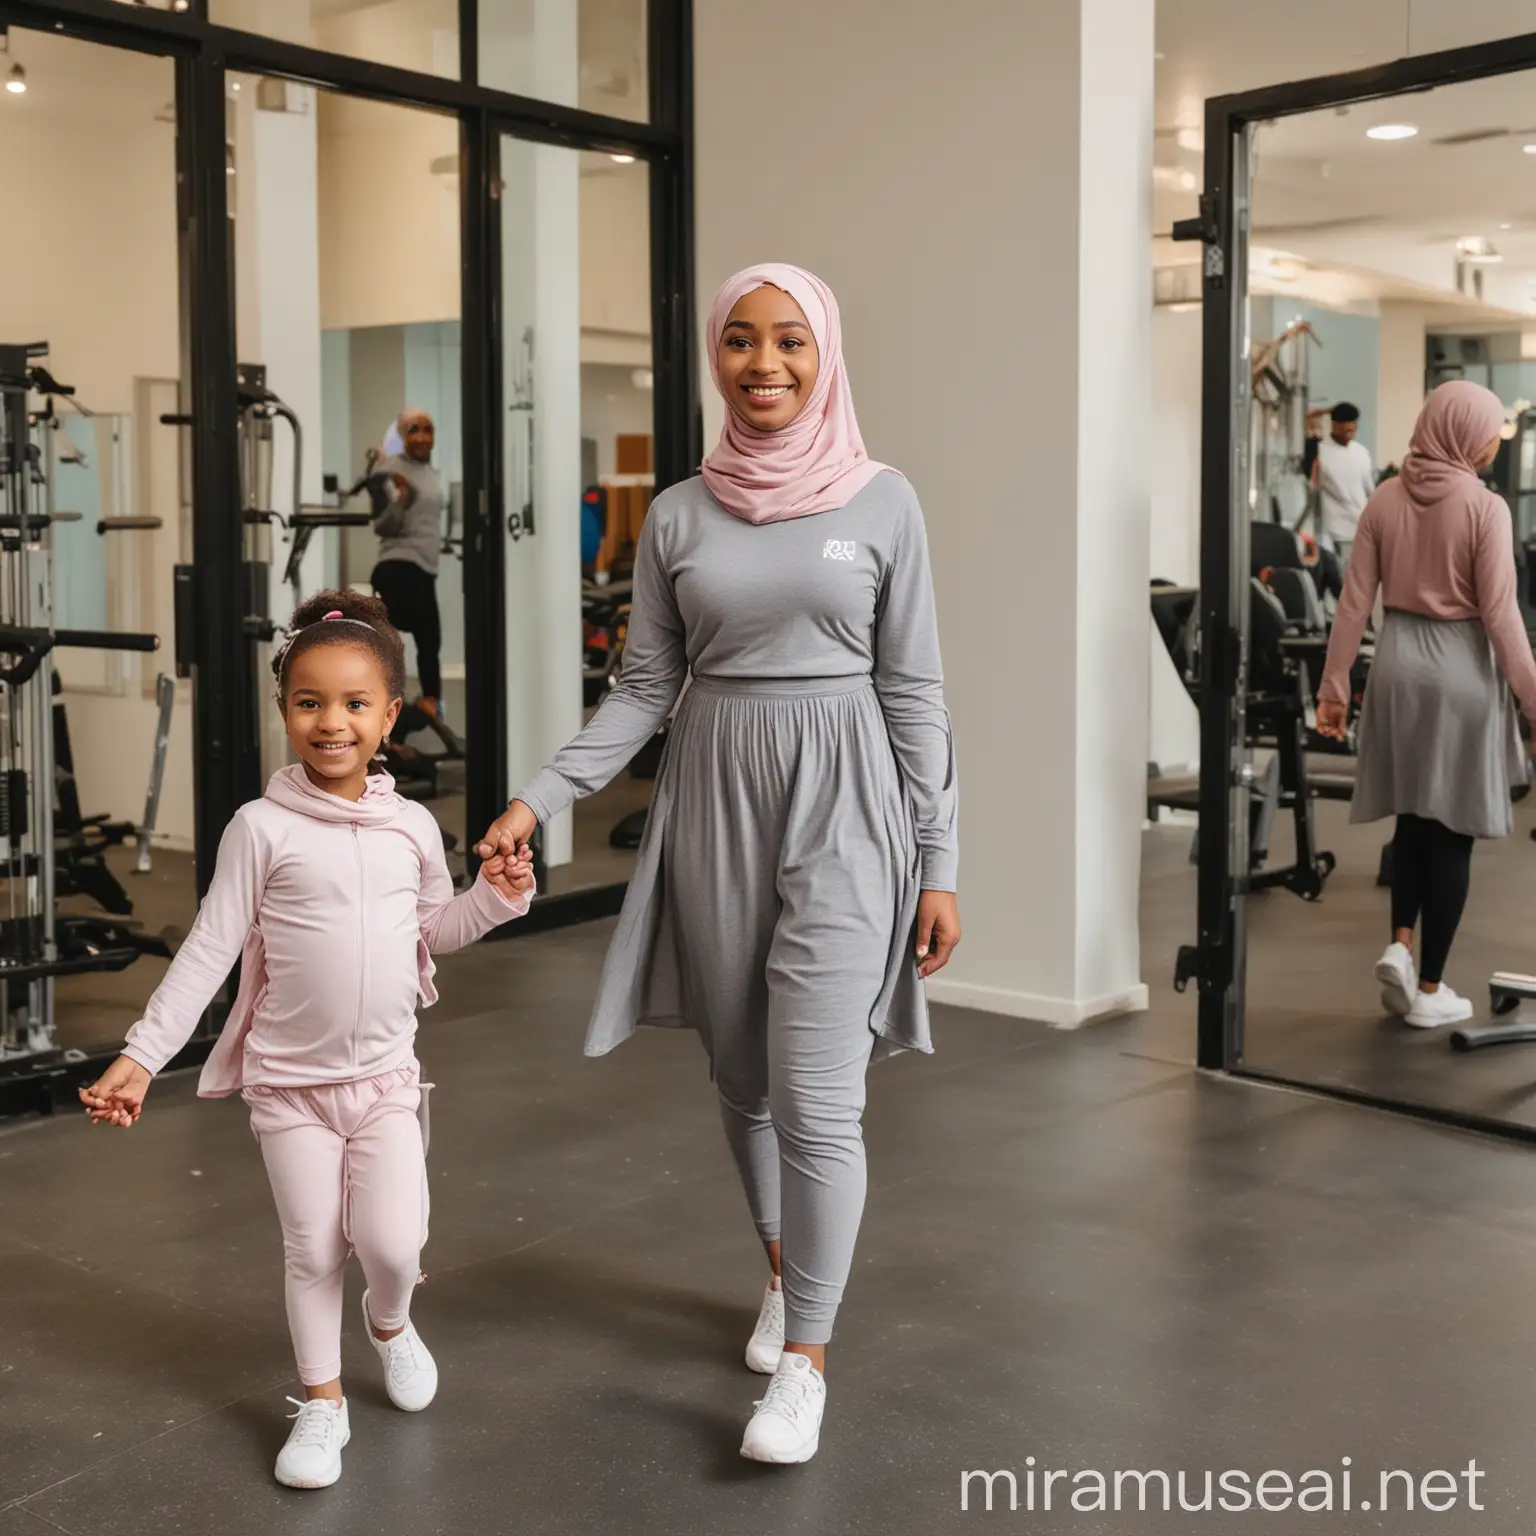 Smiling Mother in Modest Gymwear Leads Toddler Daughter to Gym Entrance